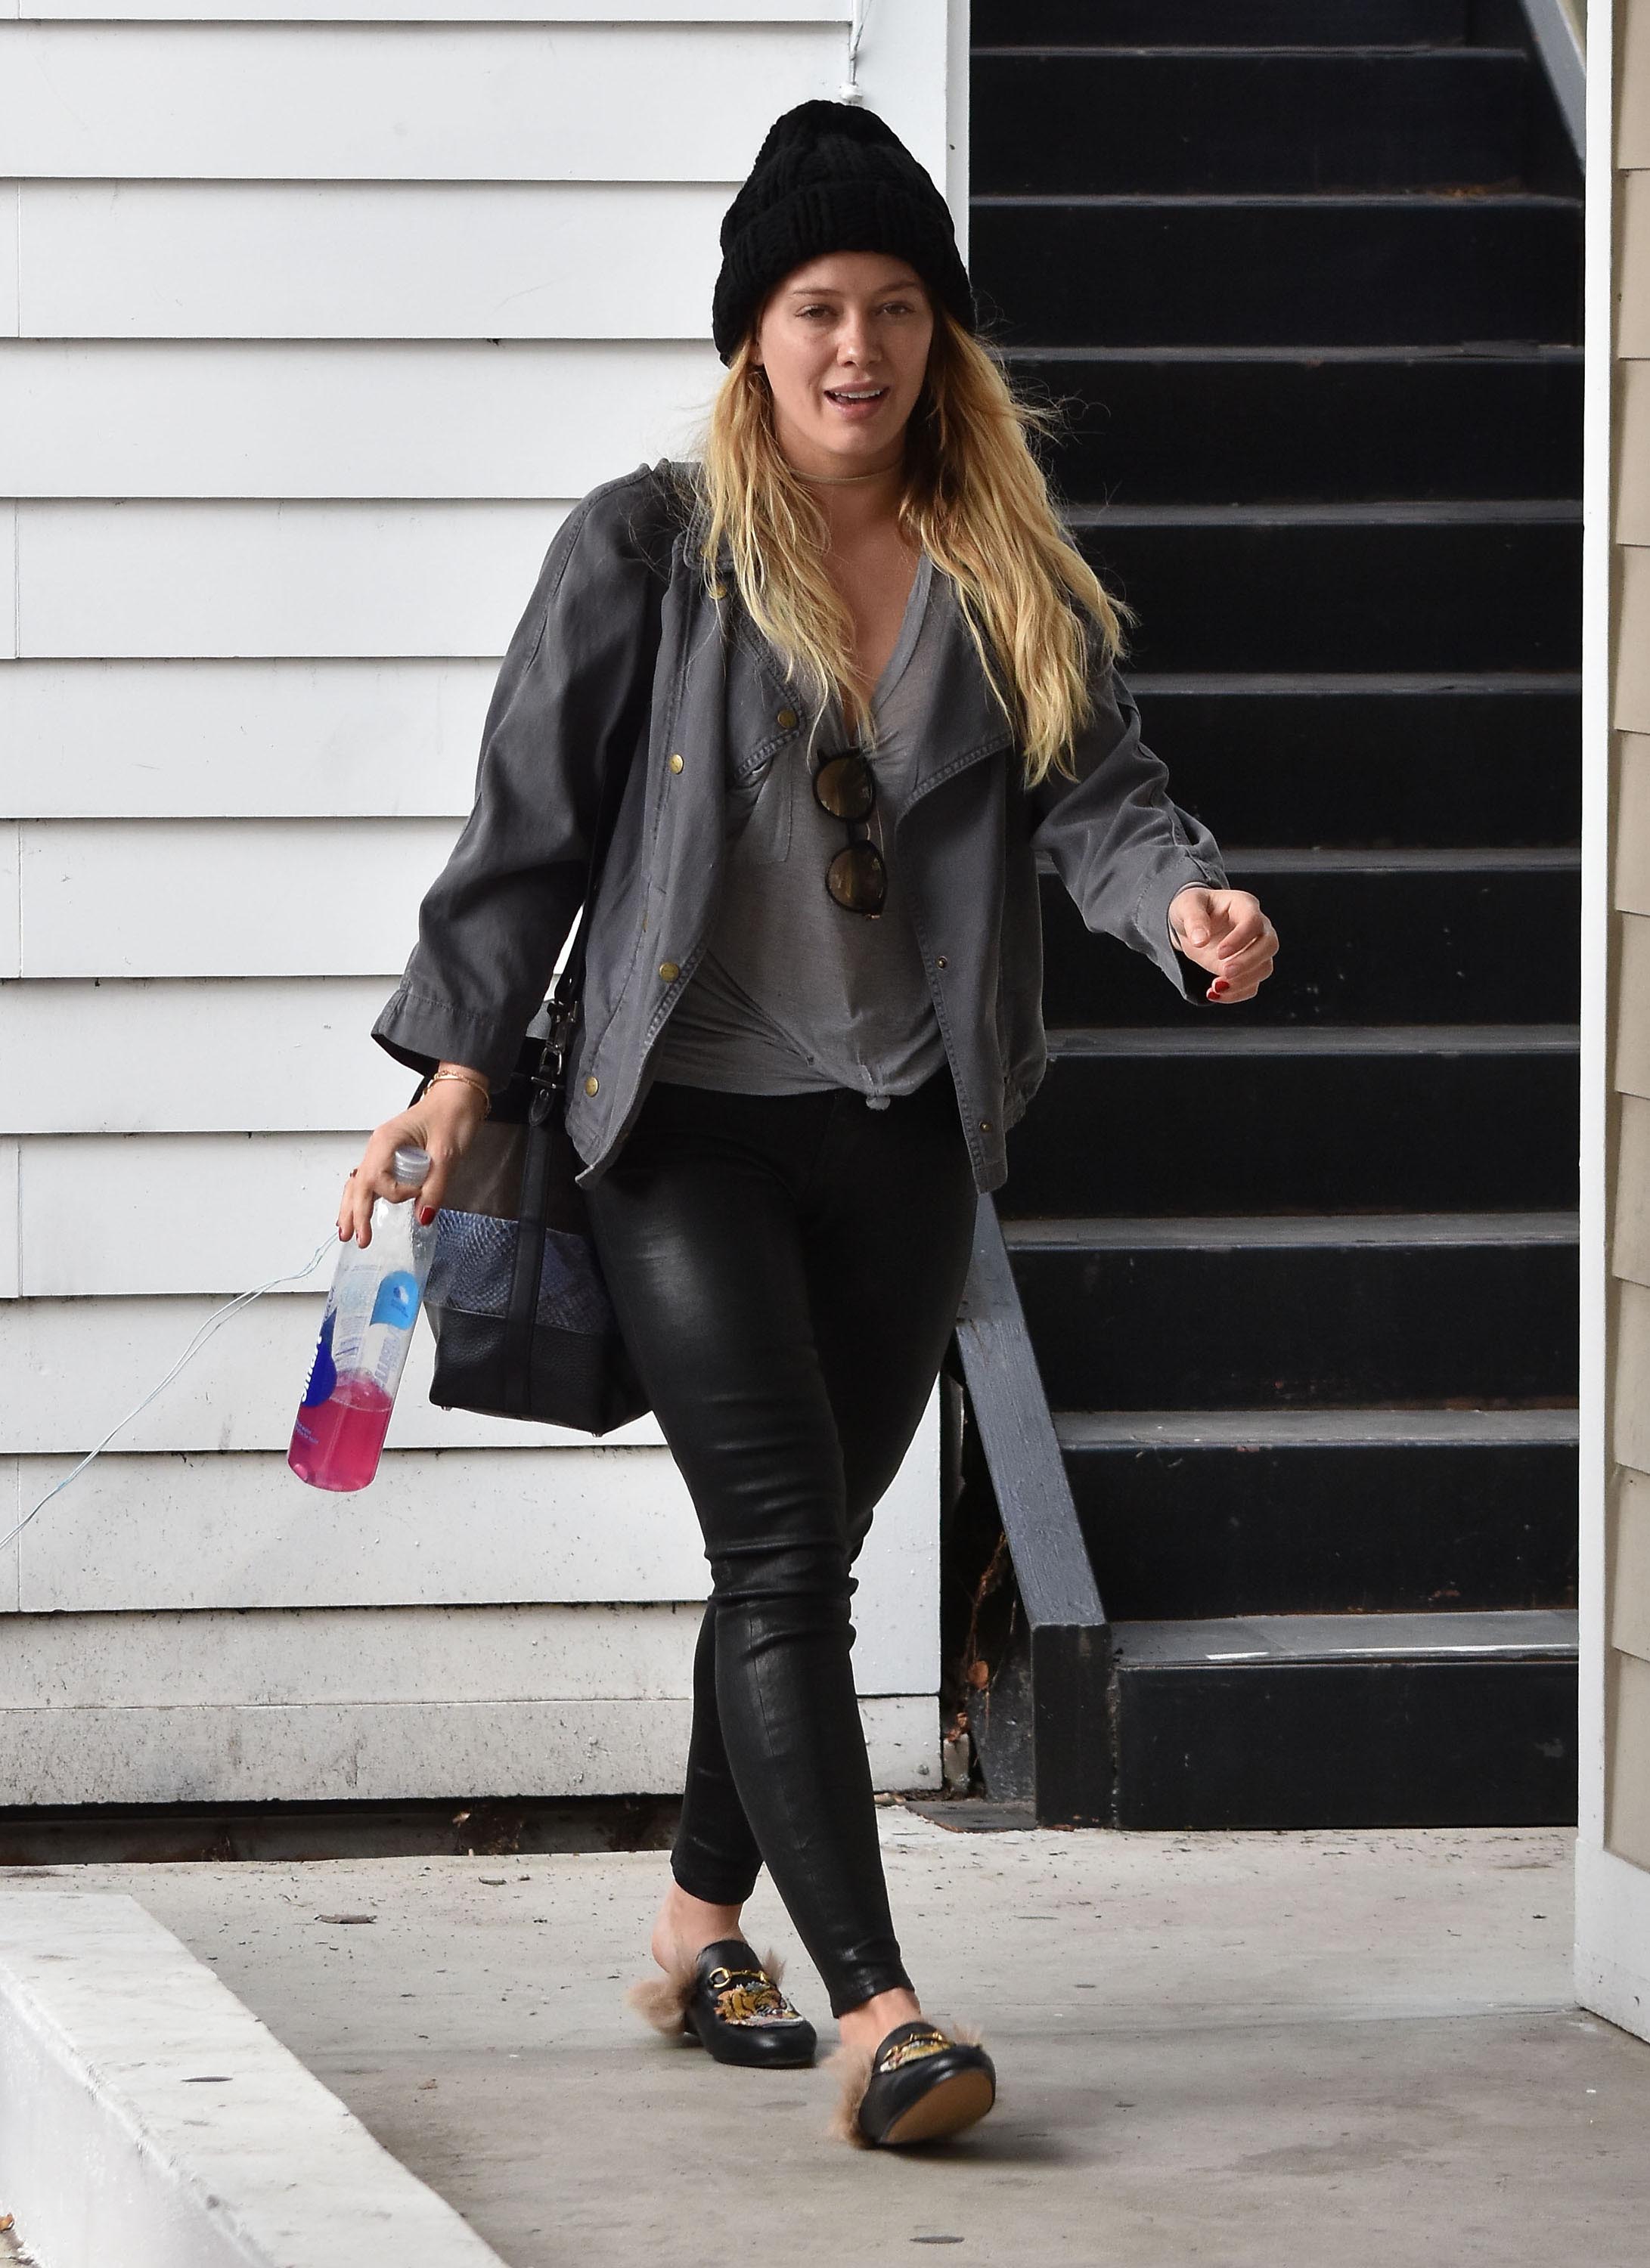 Hilary Duff spotted out and about in Studio City